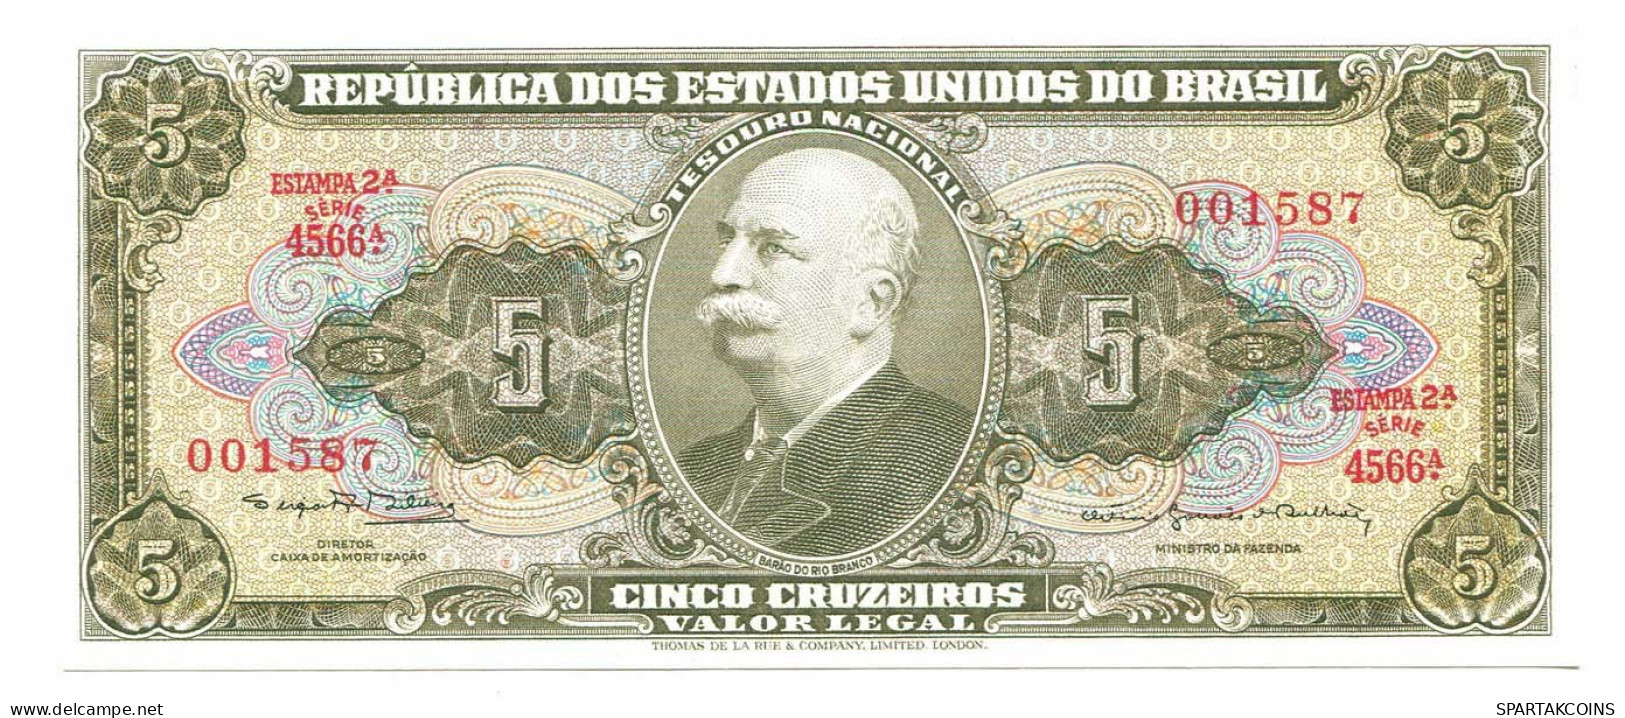 BRASIL 5 CRUZEIROS 1962 UNC Paper Money Banknote #P10831.4 - [11] Local Banknote Issues